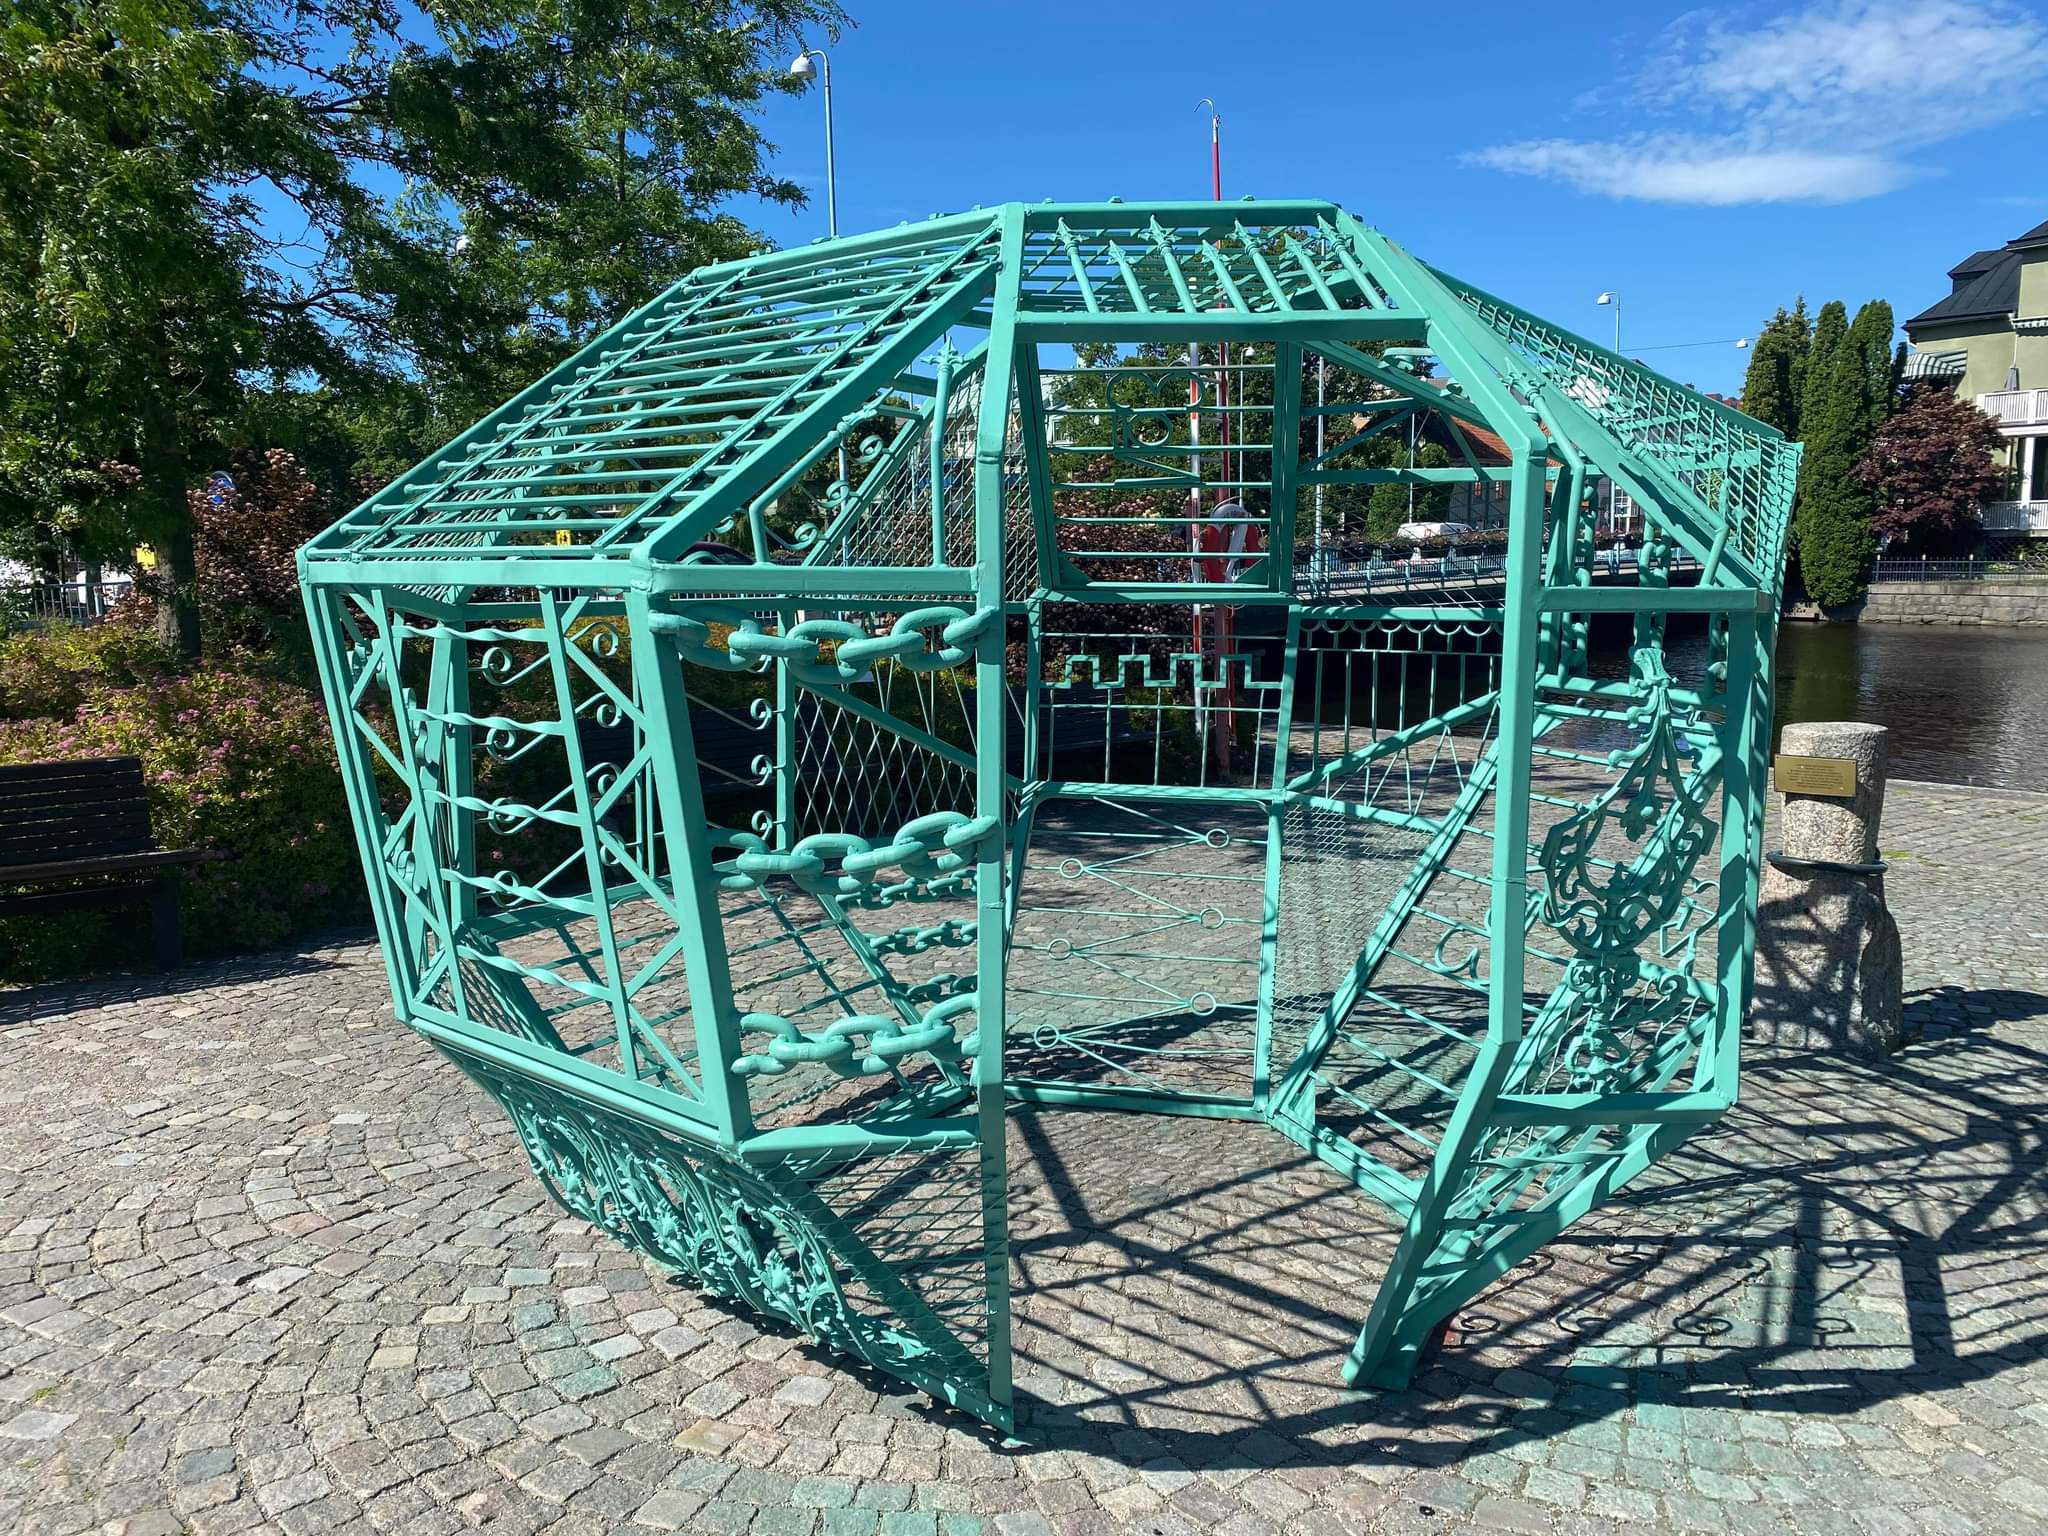 A turquoise steel cage made up of different fences welded together as a globe that you can walk into.